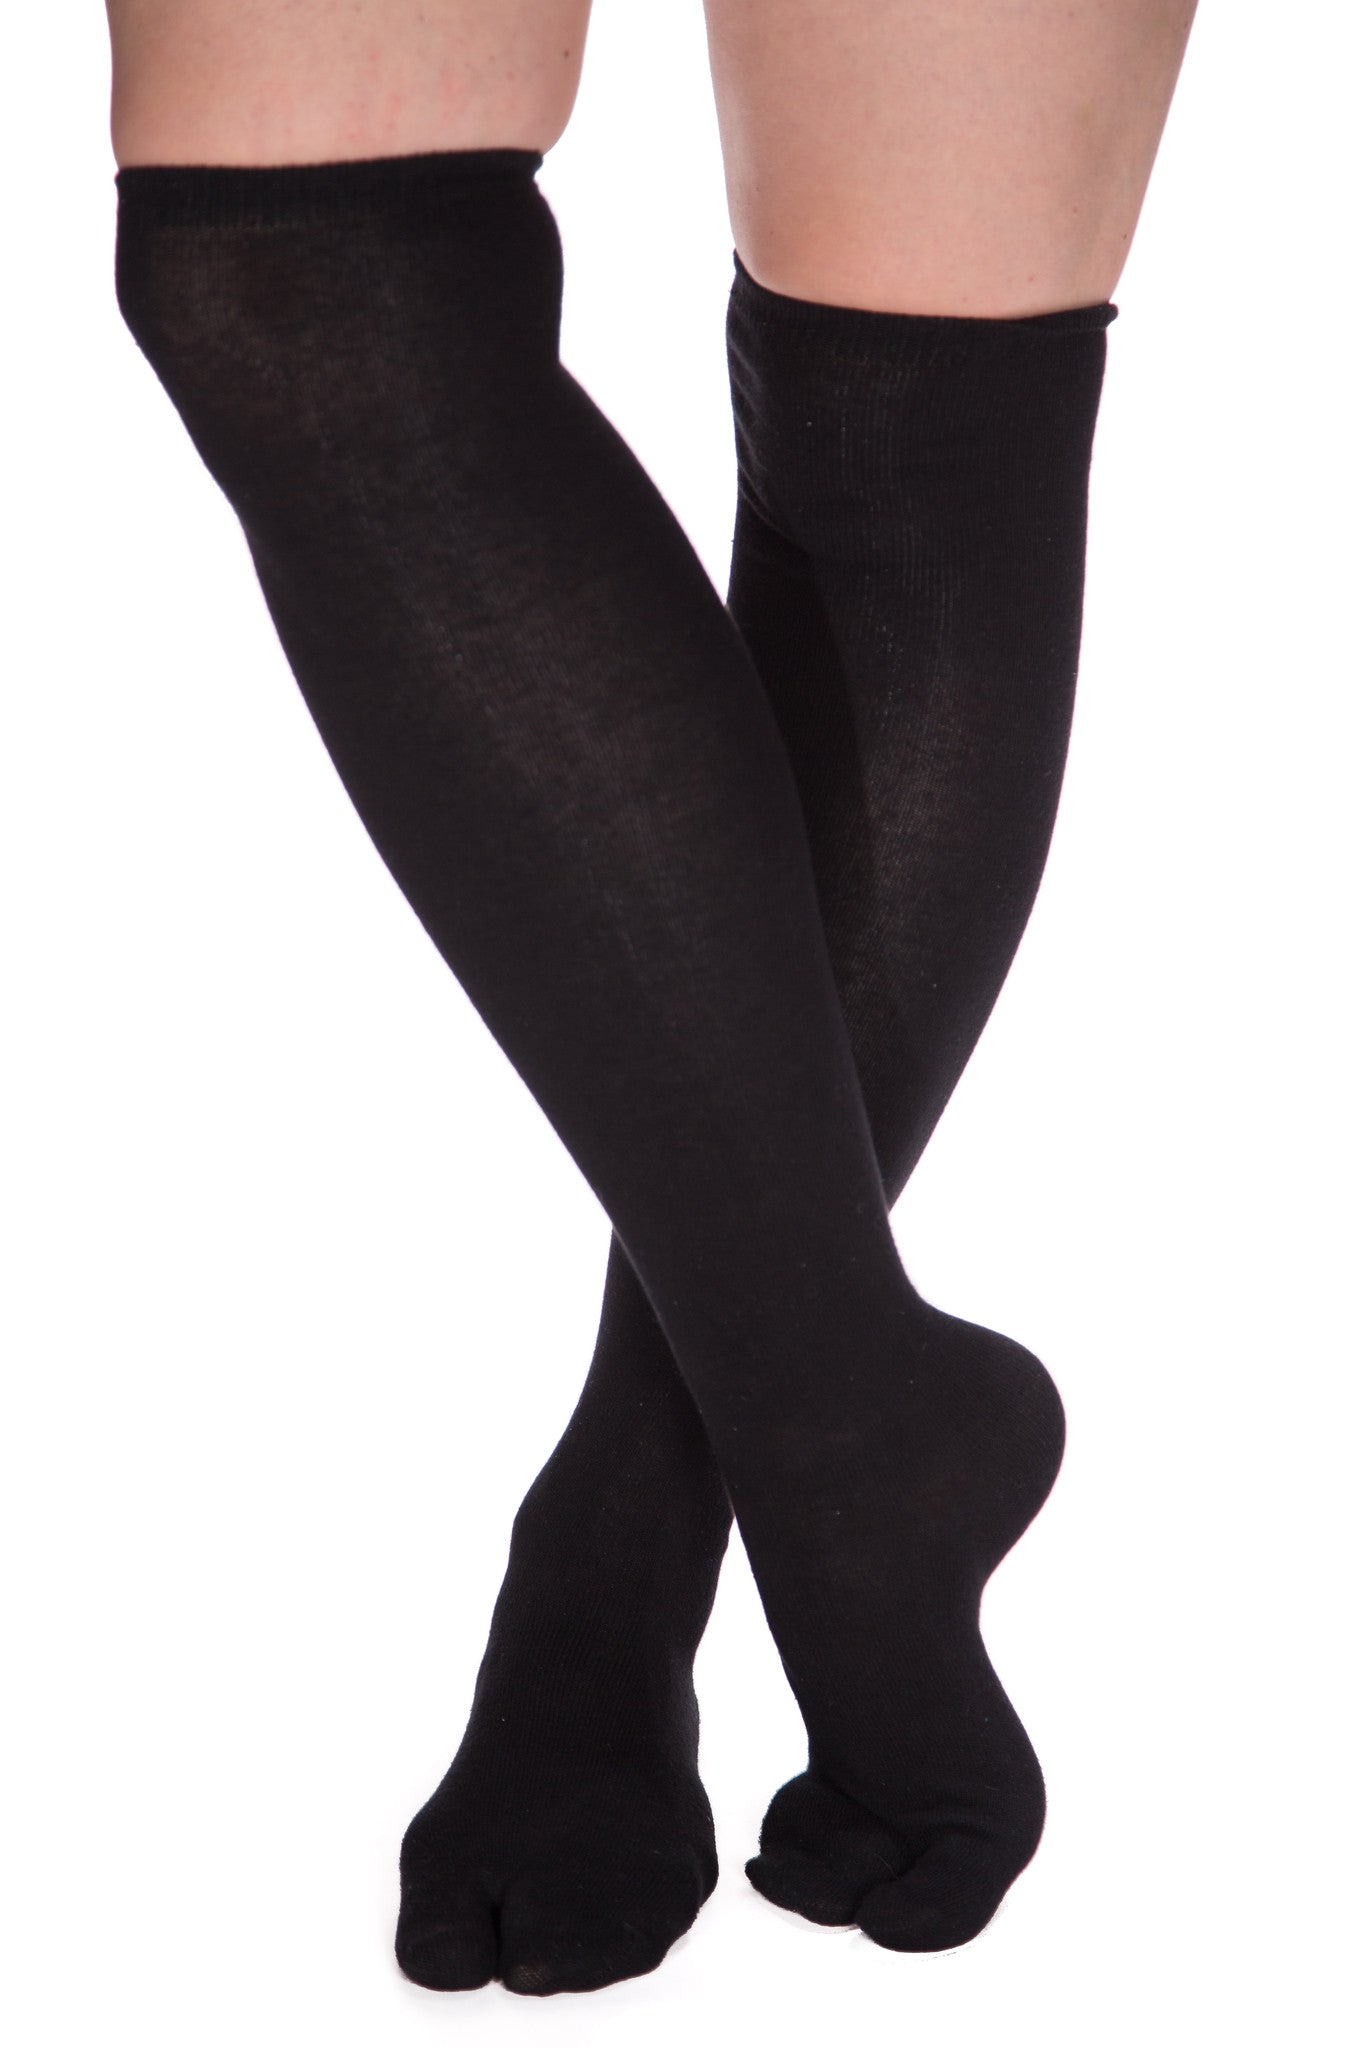 B005G4ZHFS - 3 Over The Knee Black Solid